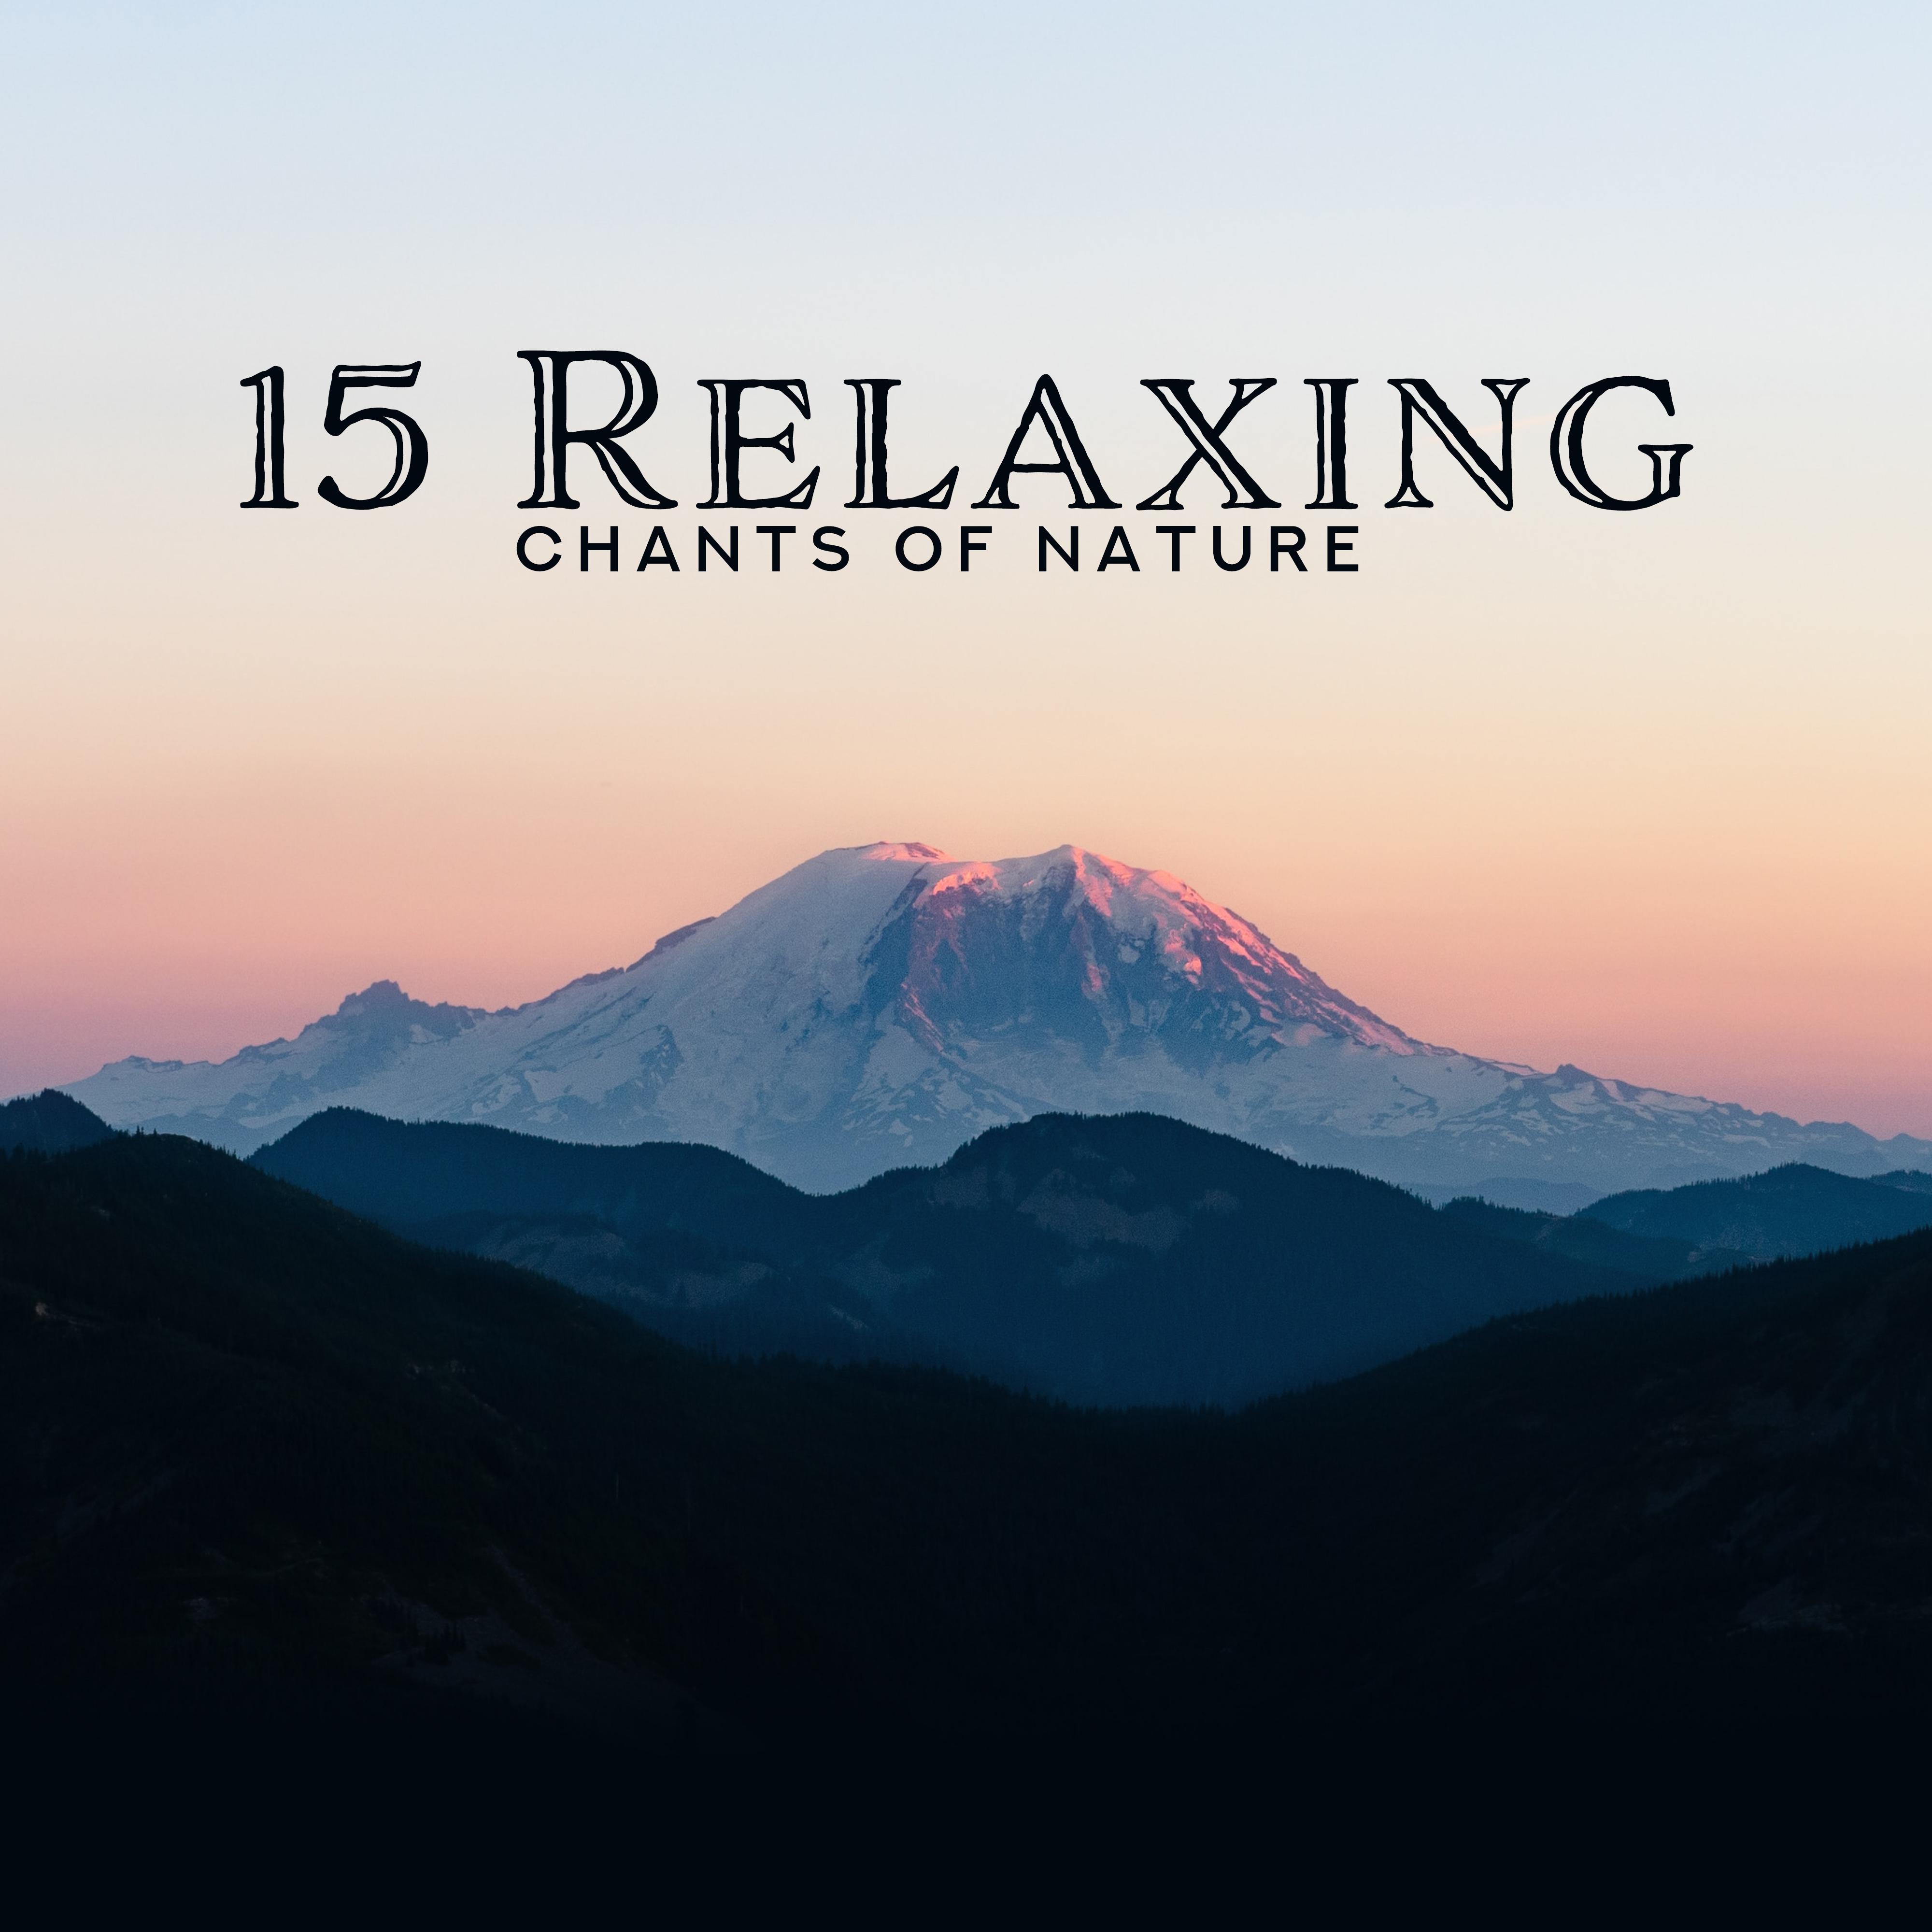 15 Relaxing Chants of Nature: 2019 New Age Music with Nature Sounds for Many Relaxing Occasions Like Rest at Home After Long Day, Sleep, Massage Therapy, Spa, Wellness